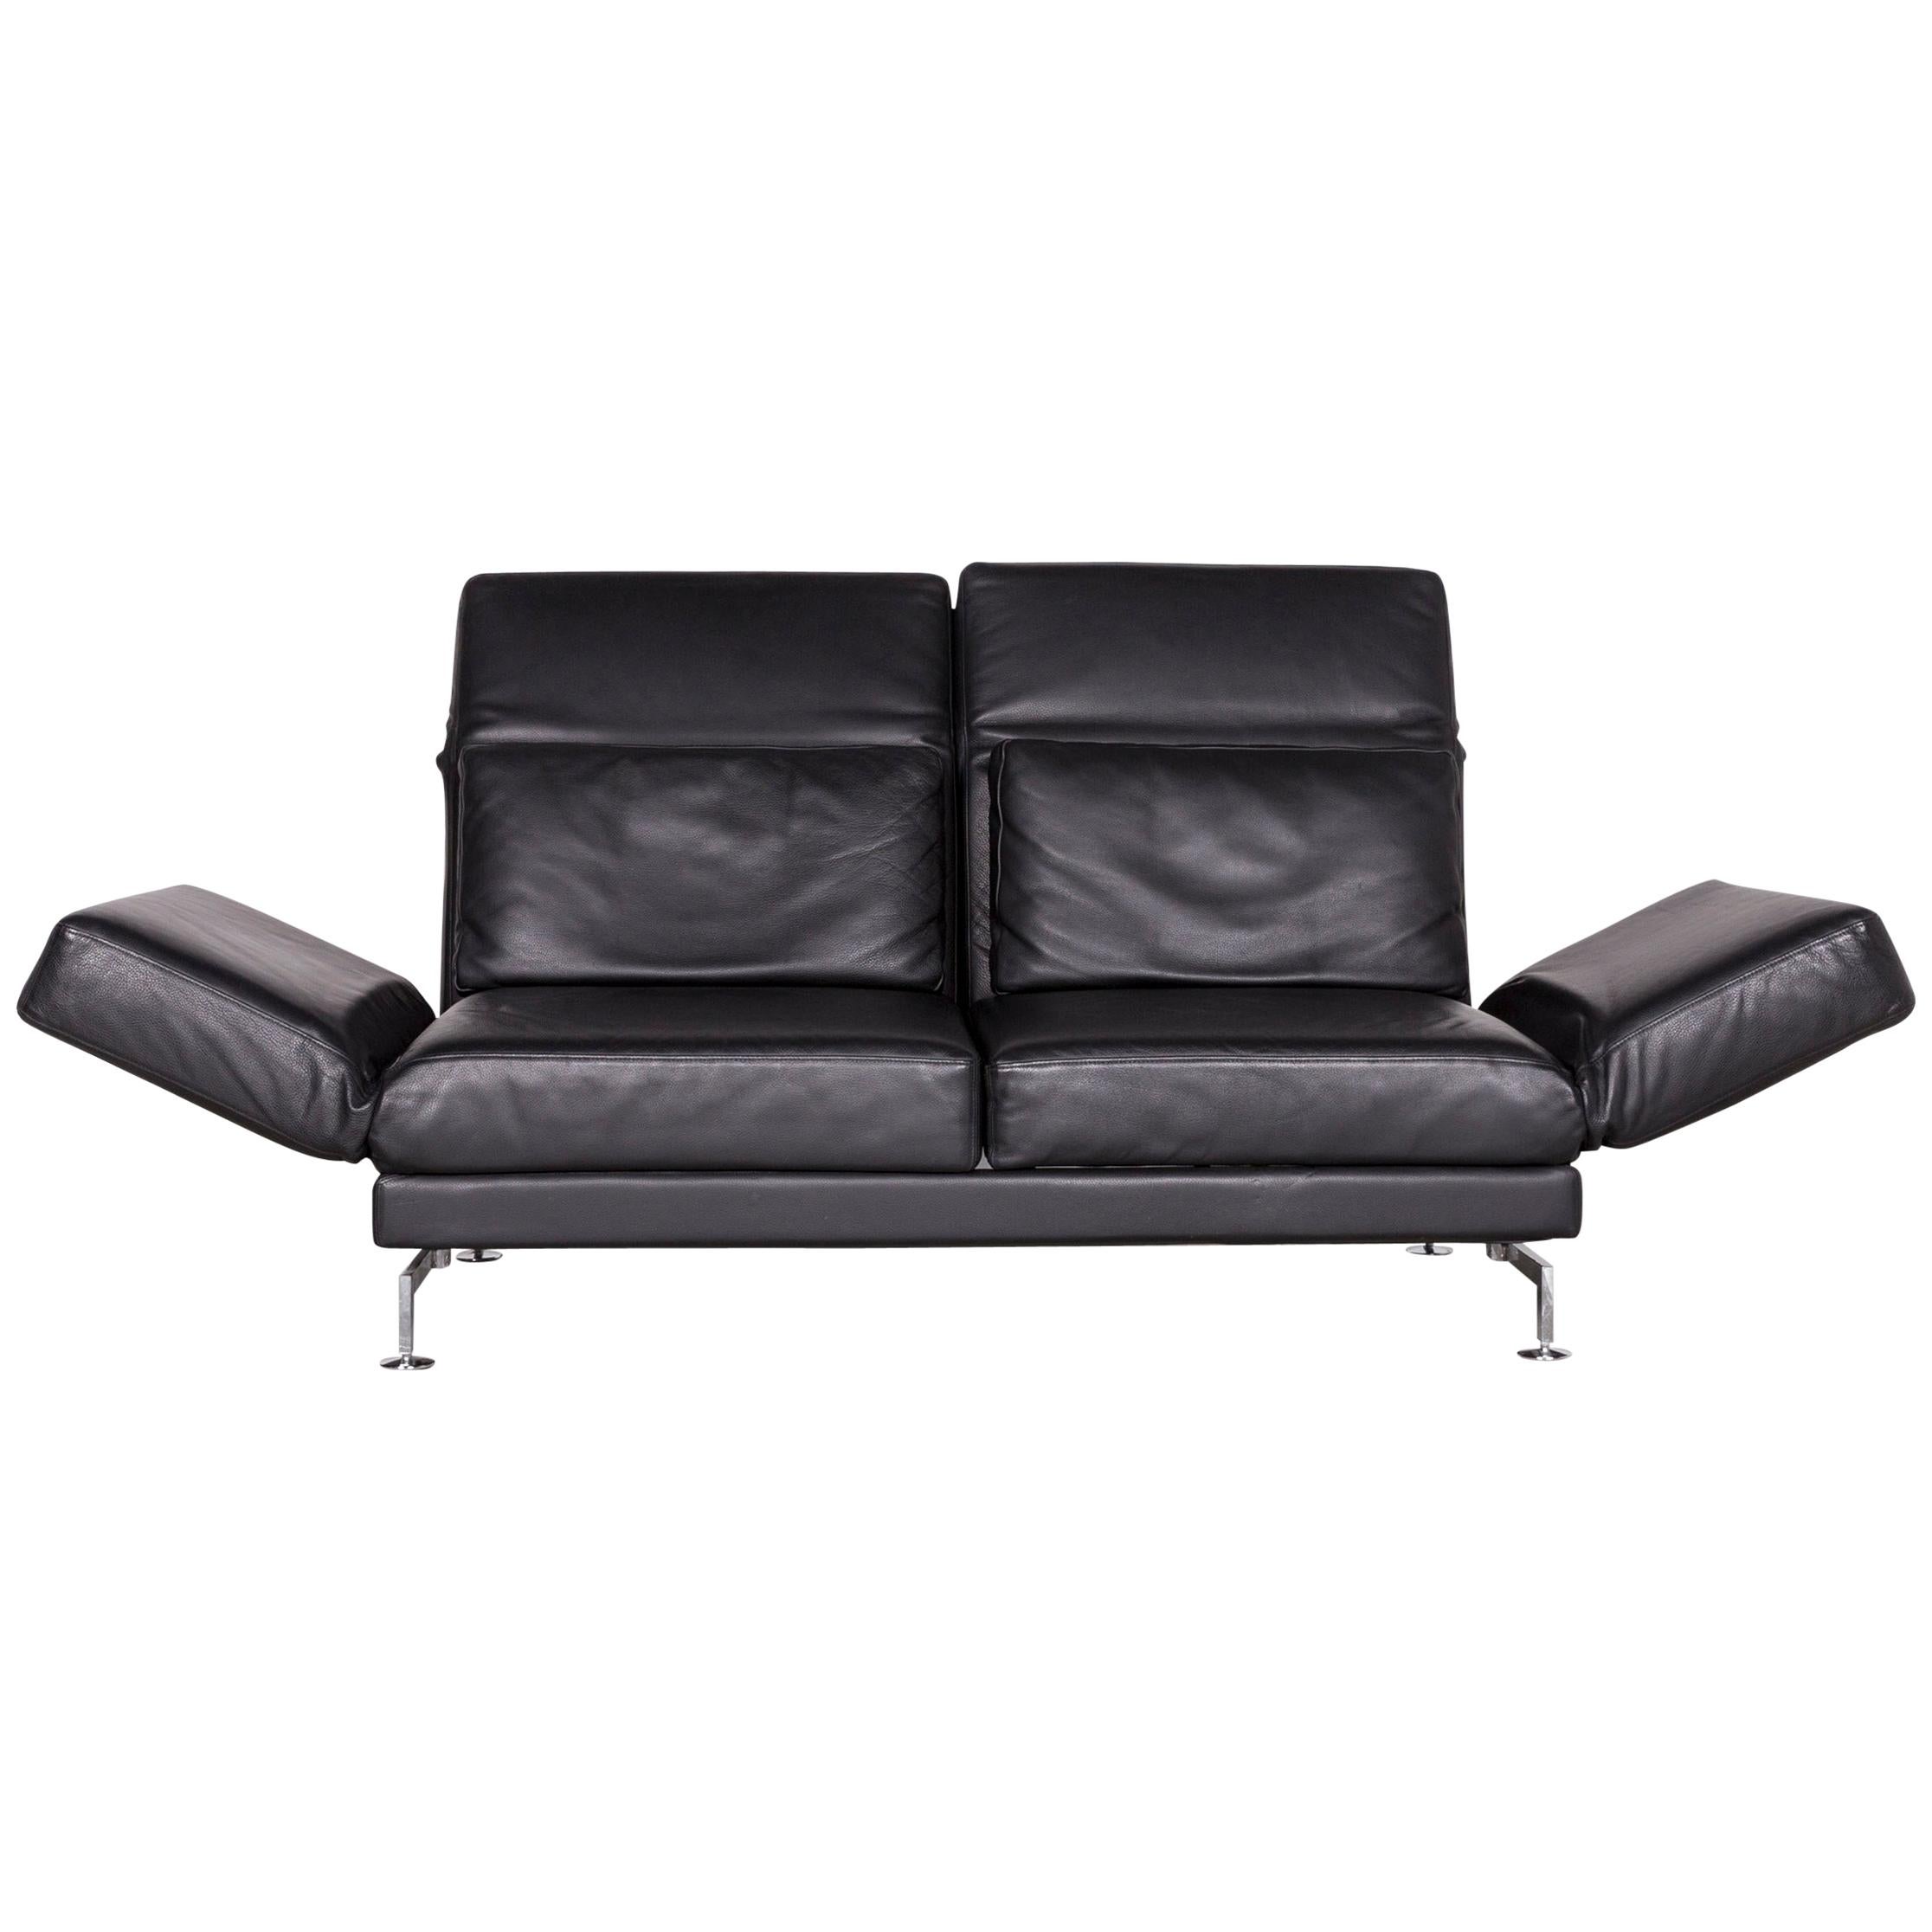 Brühl & Sippold Moule Designer Leather Sofa Black Two-Seat Couch with Function